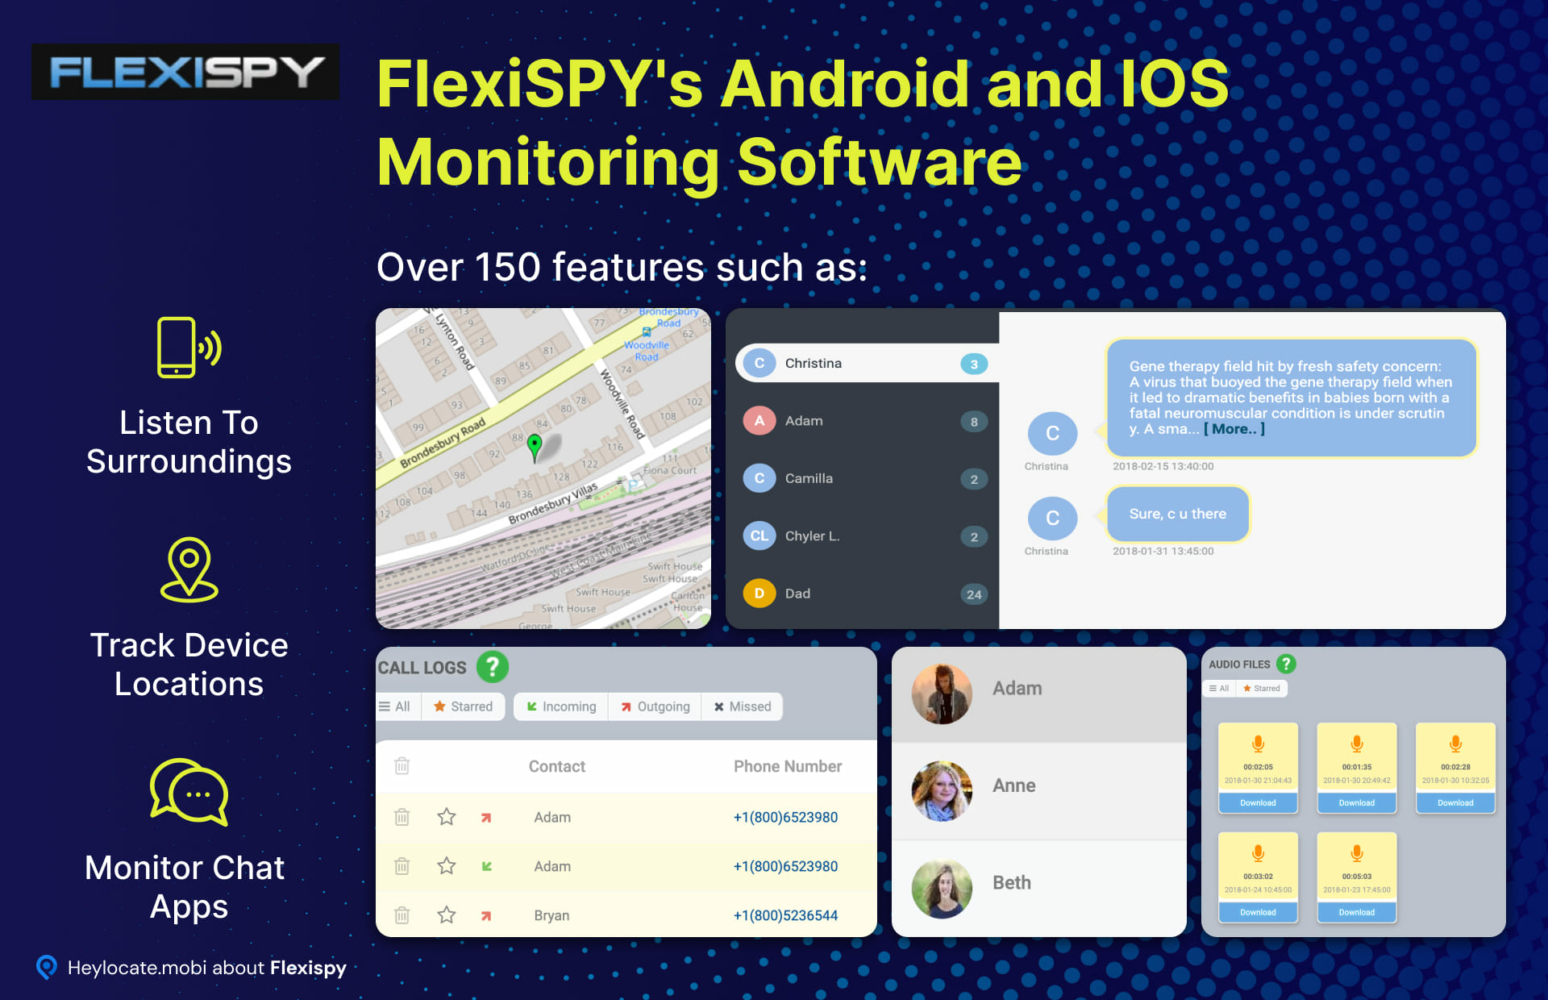 An overview of FlexiSPY's monitoring features for Android and iOS devices, highlighting capabilities like listening to surroundings, tracking device locations, and monitoring various chat applications, with visual examples of the software interface.